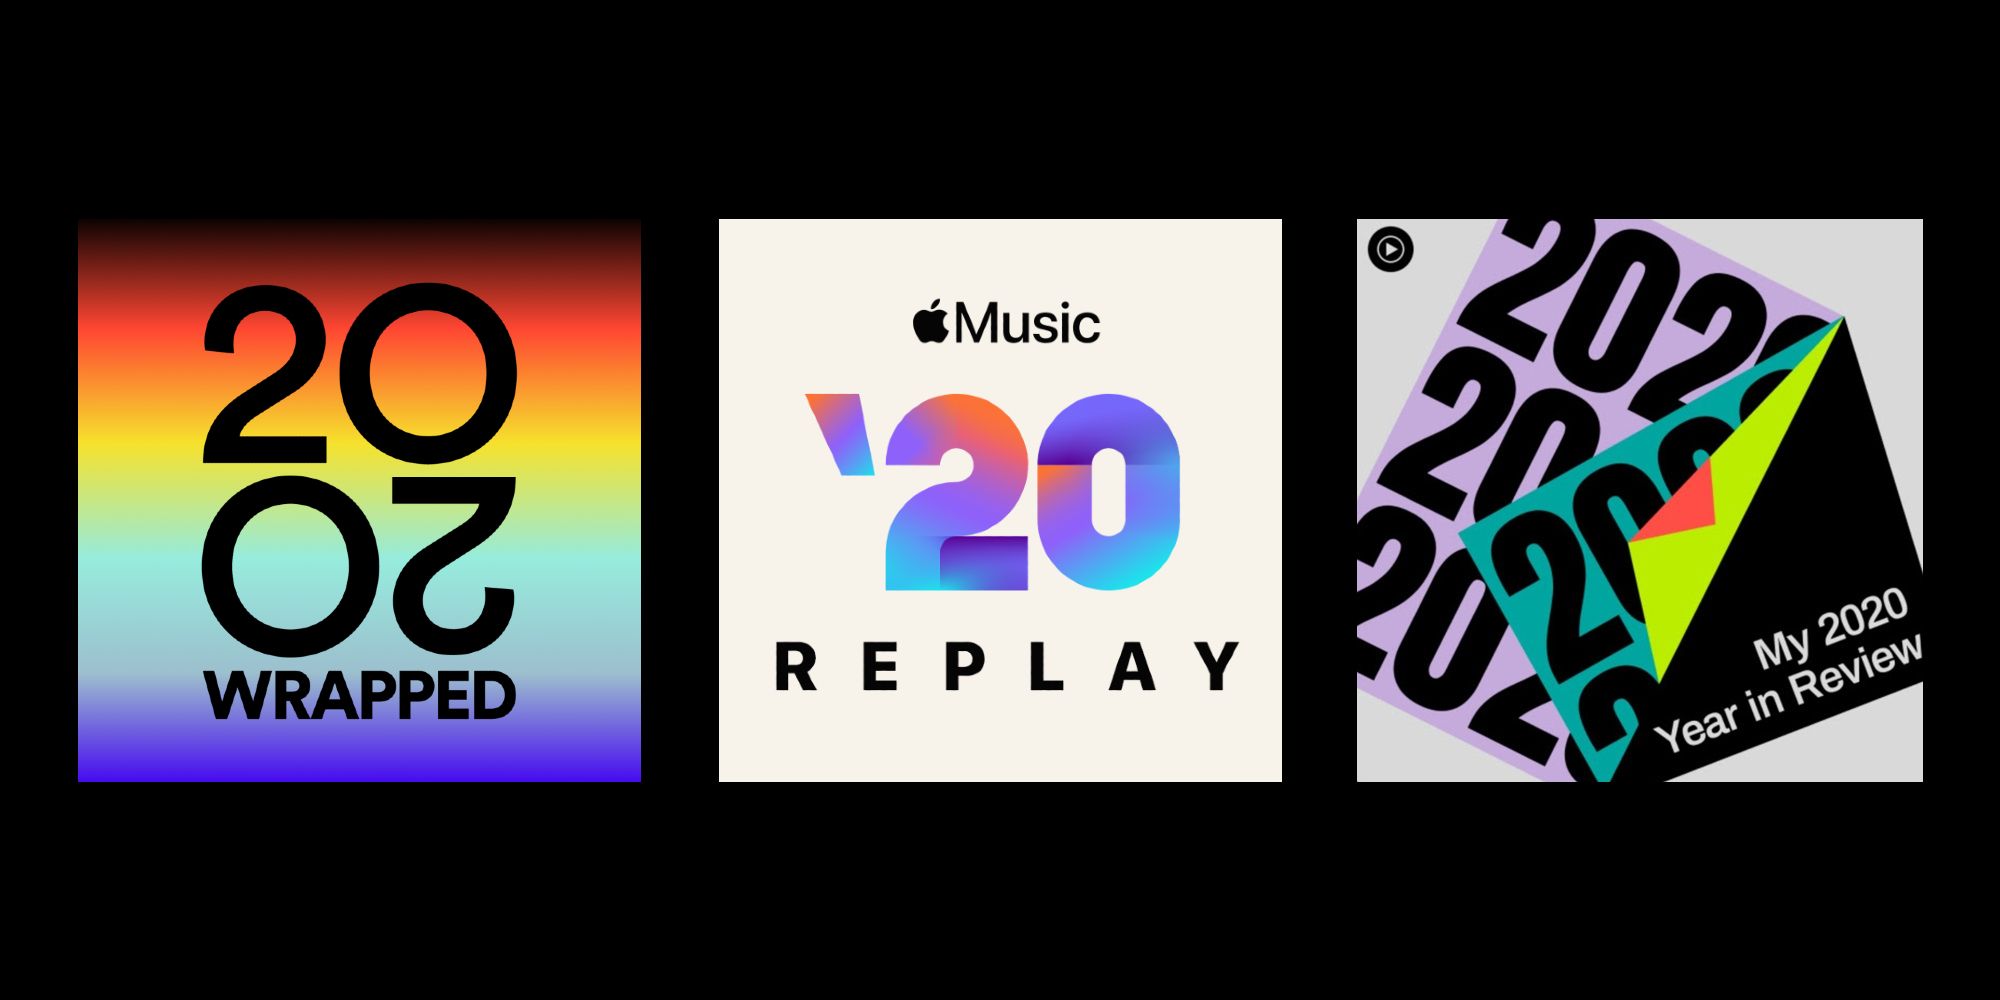 Spotify Wrapped Vs. Apple Music Replay Vs. YouTube Music My Year in Review